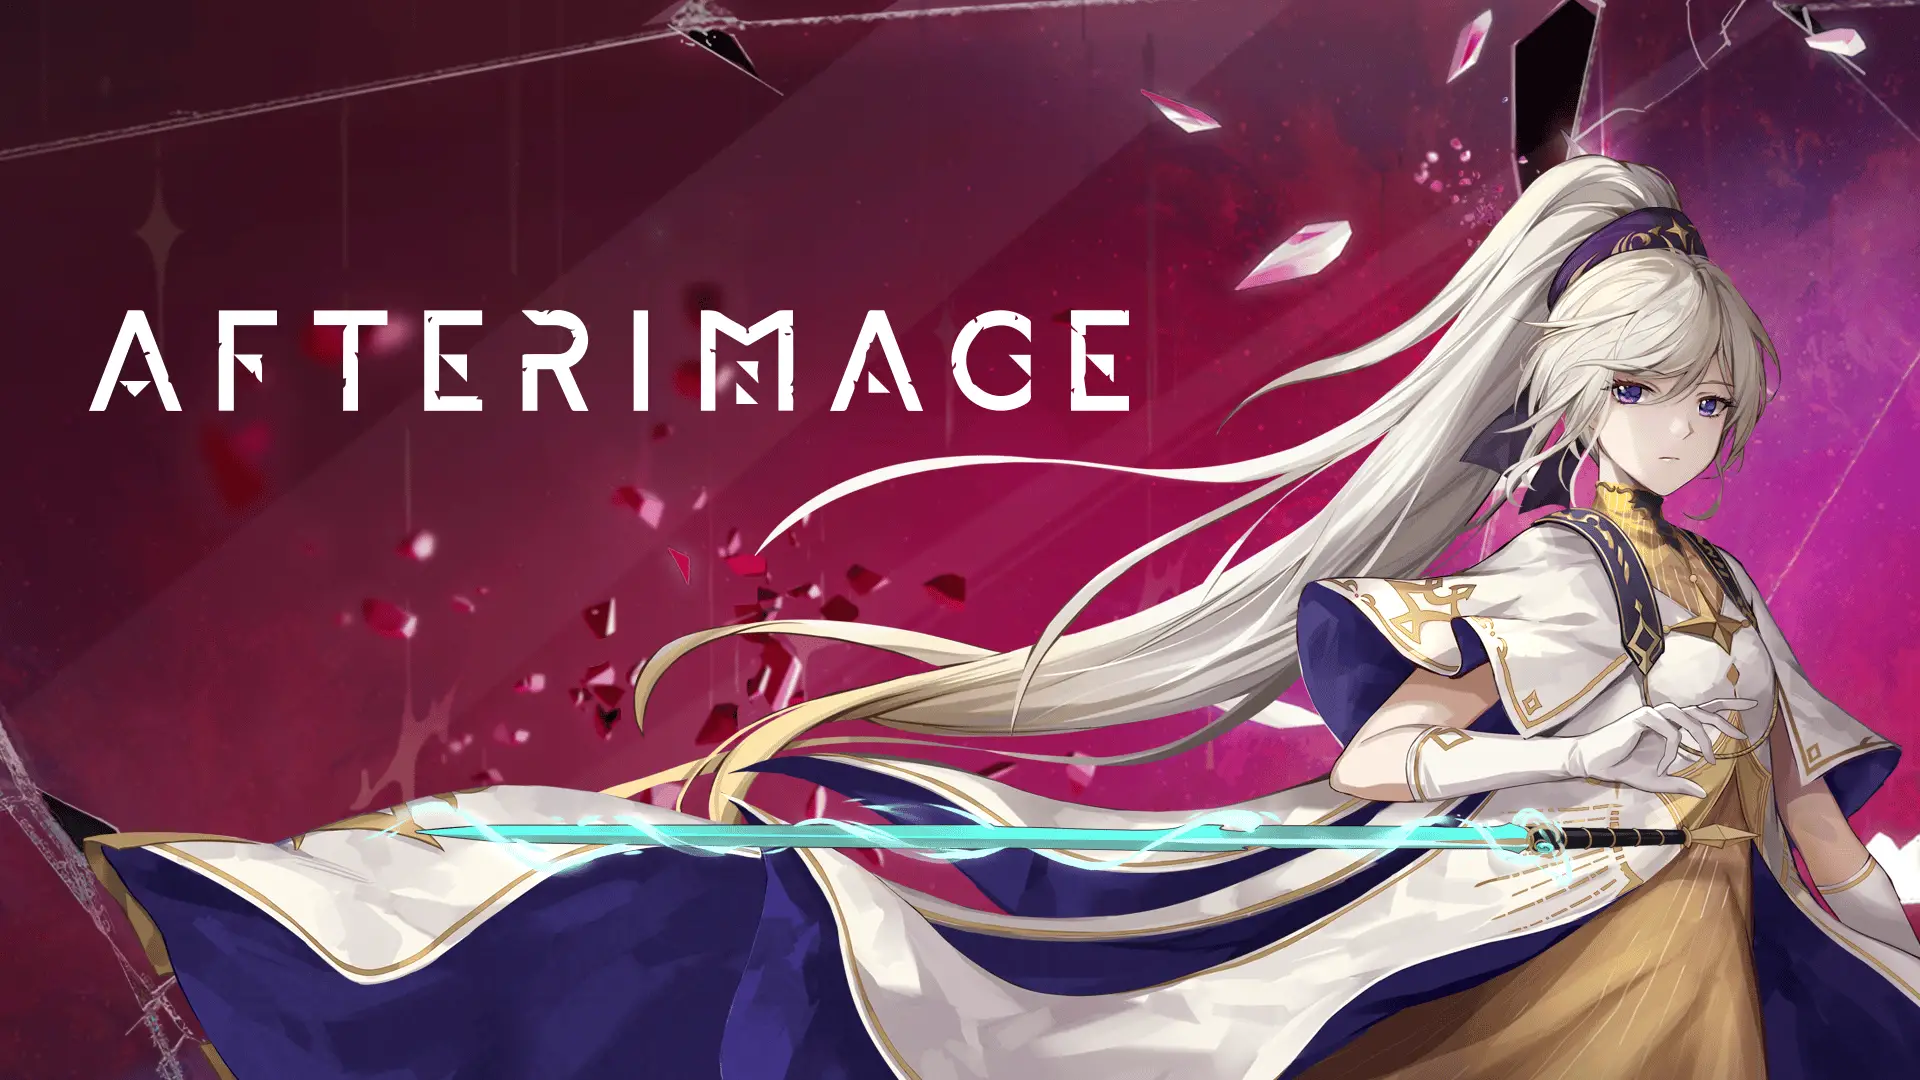 2D Action RPG ‘Afterimage’ Launches Update Adding 2 New Playable Characters